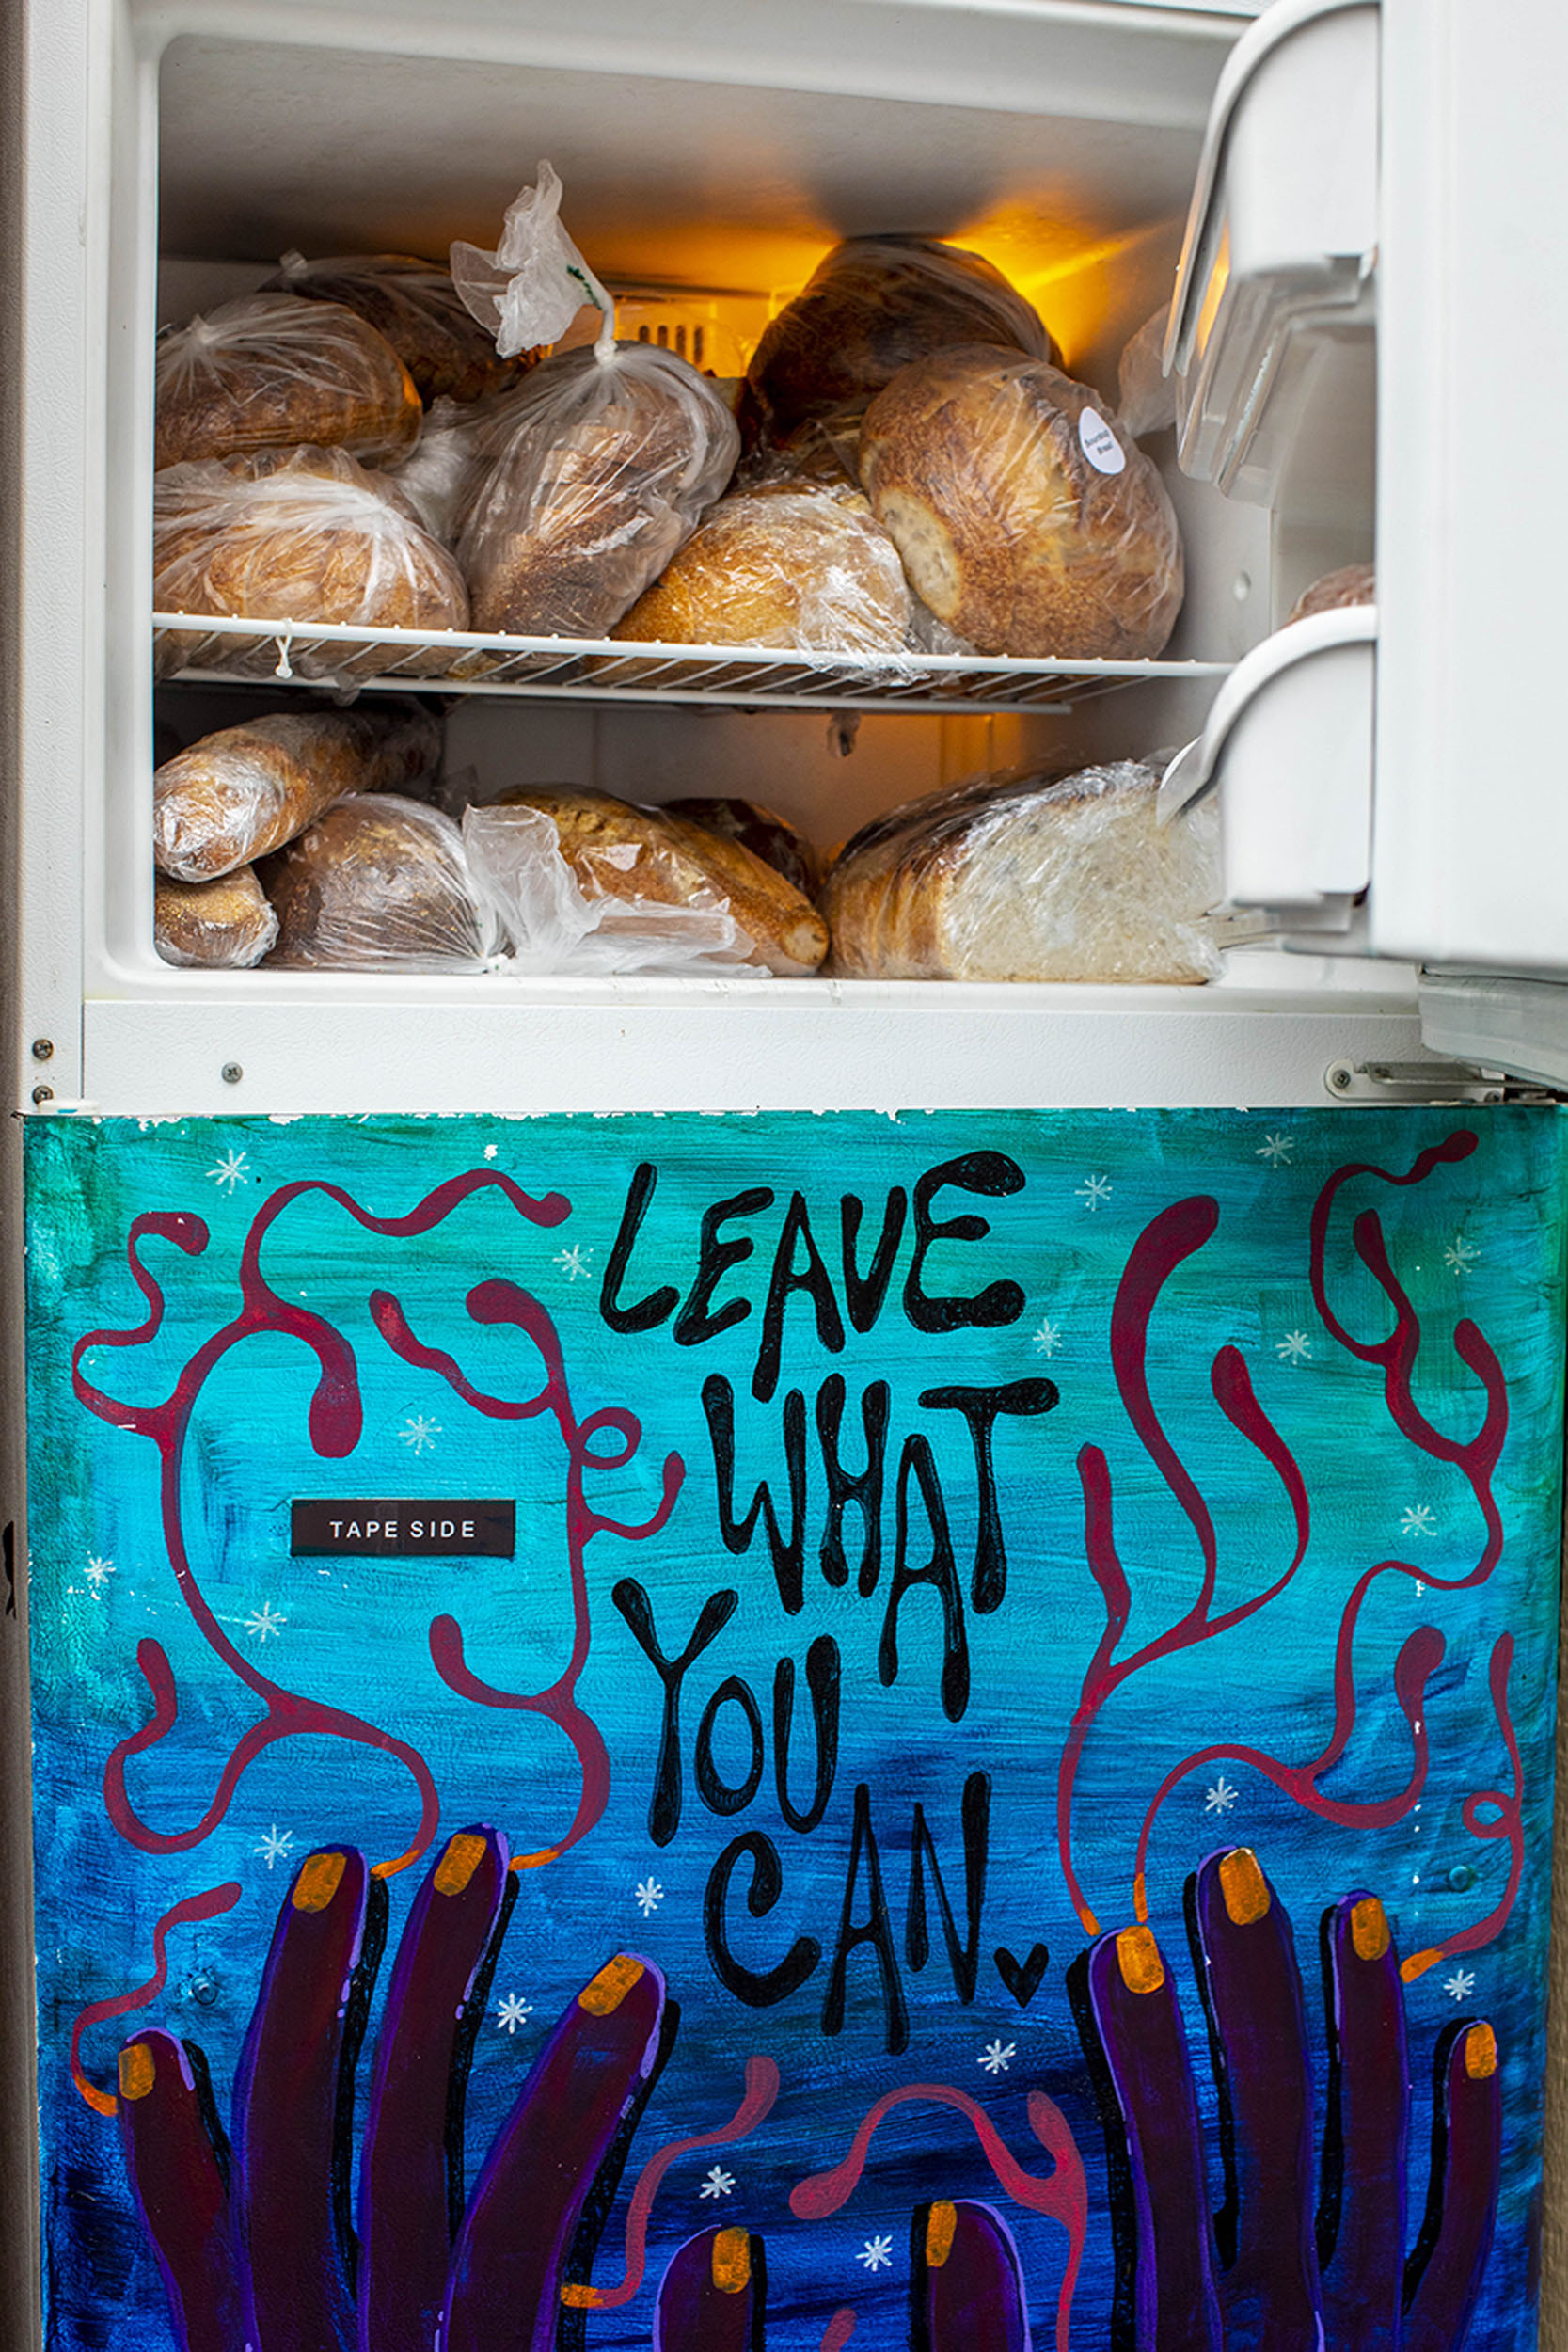 A refrigerator is filled with food as part of a mutual aid organization in Harvard Square.